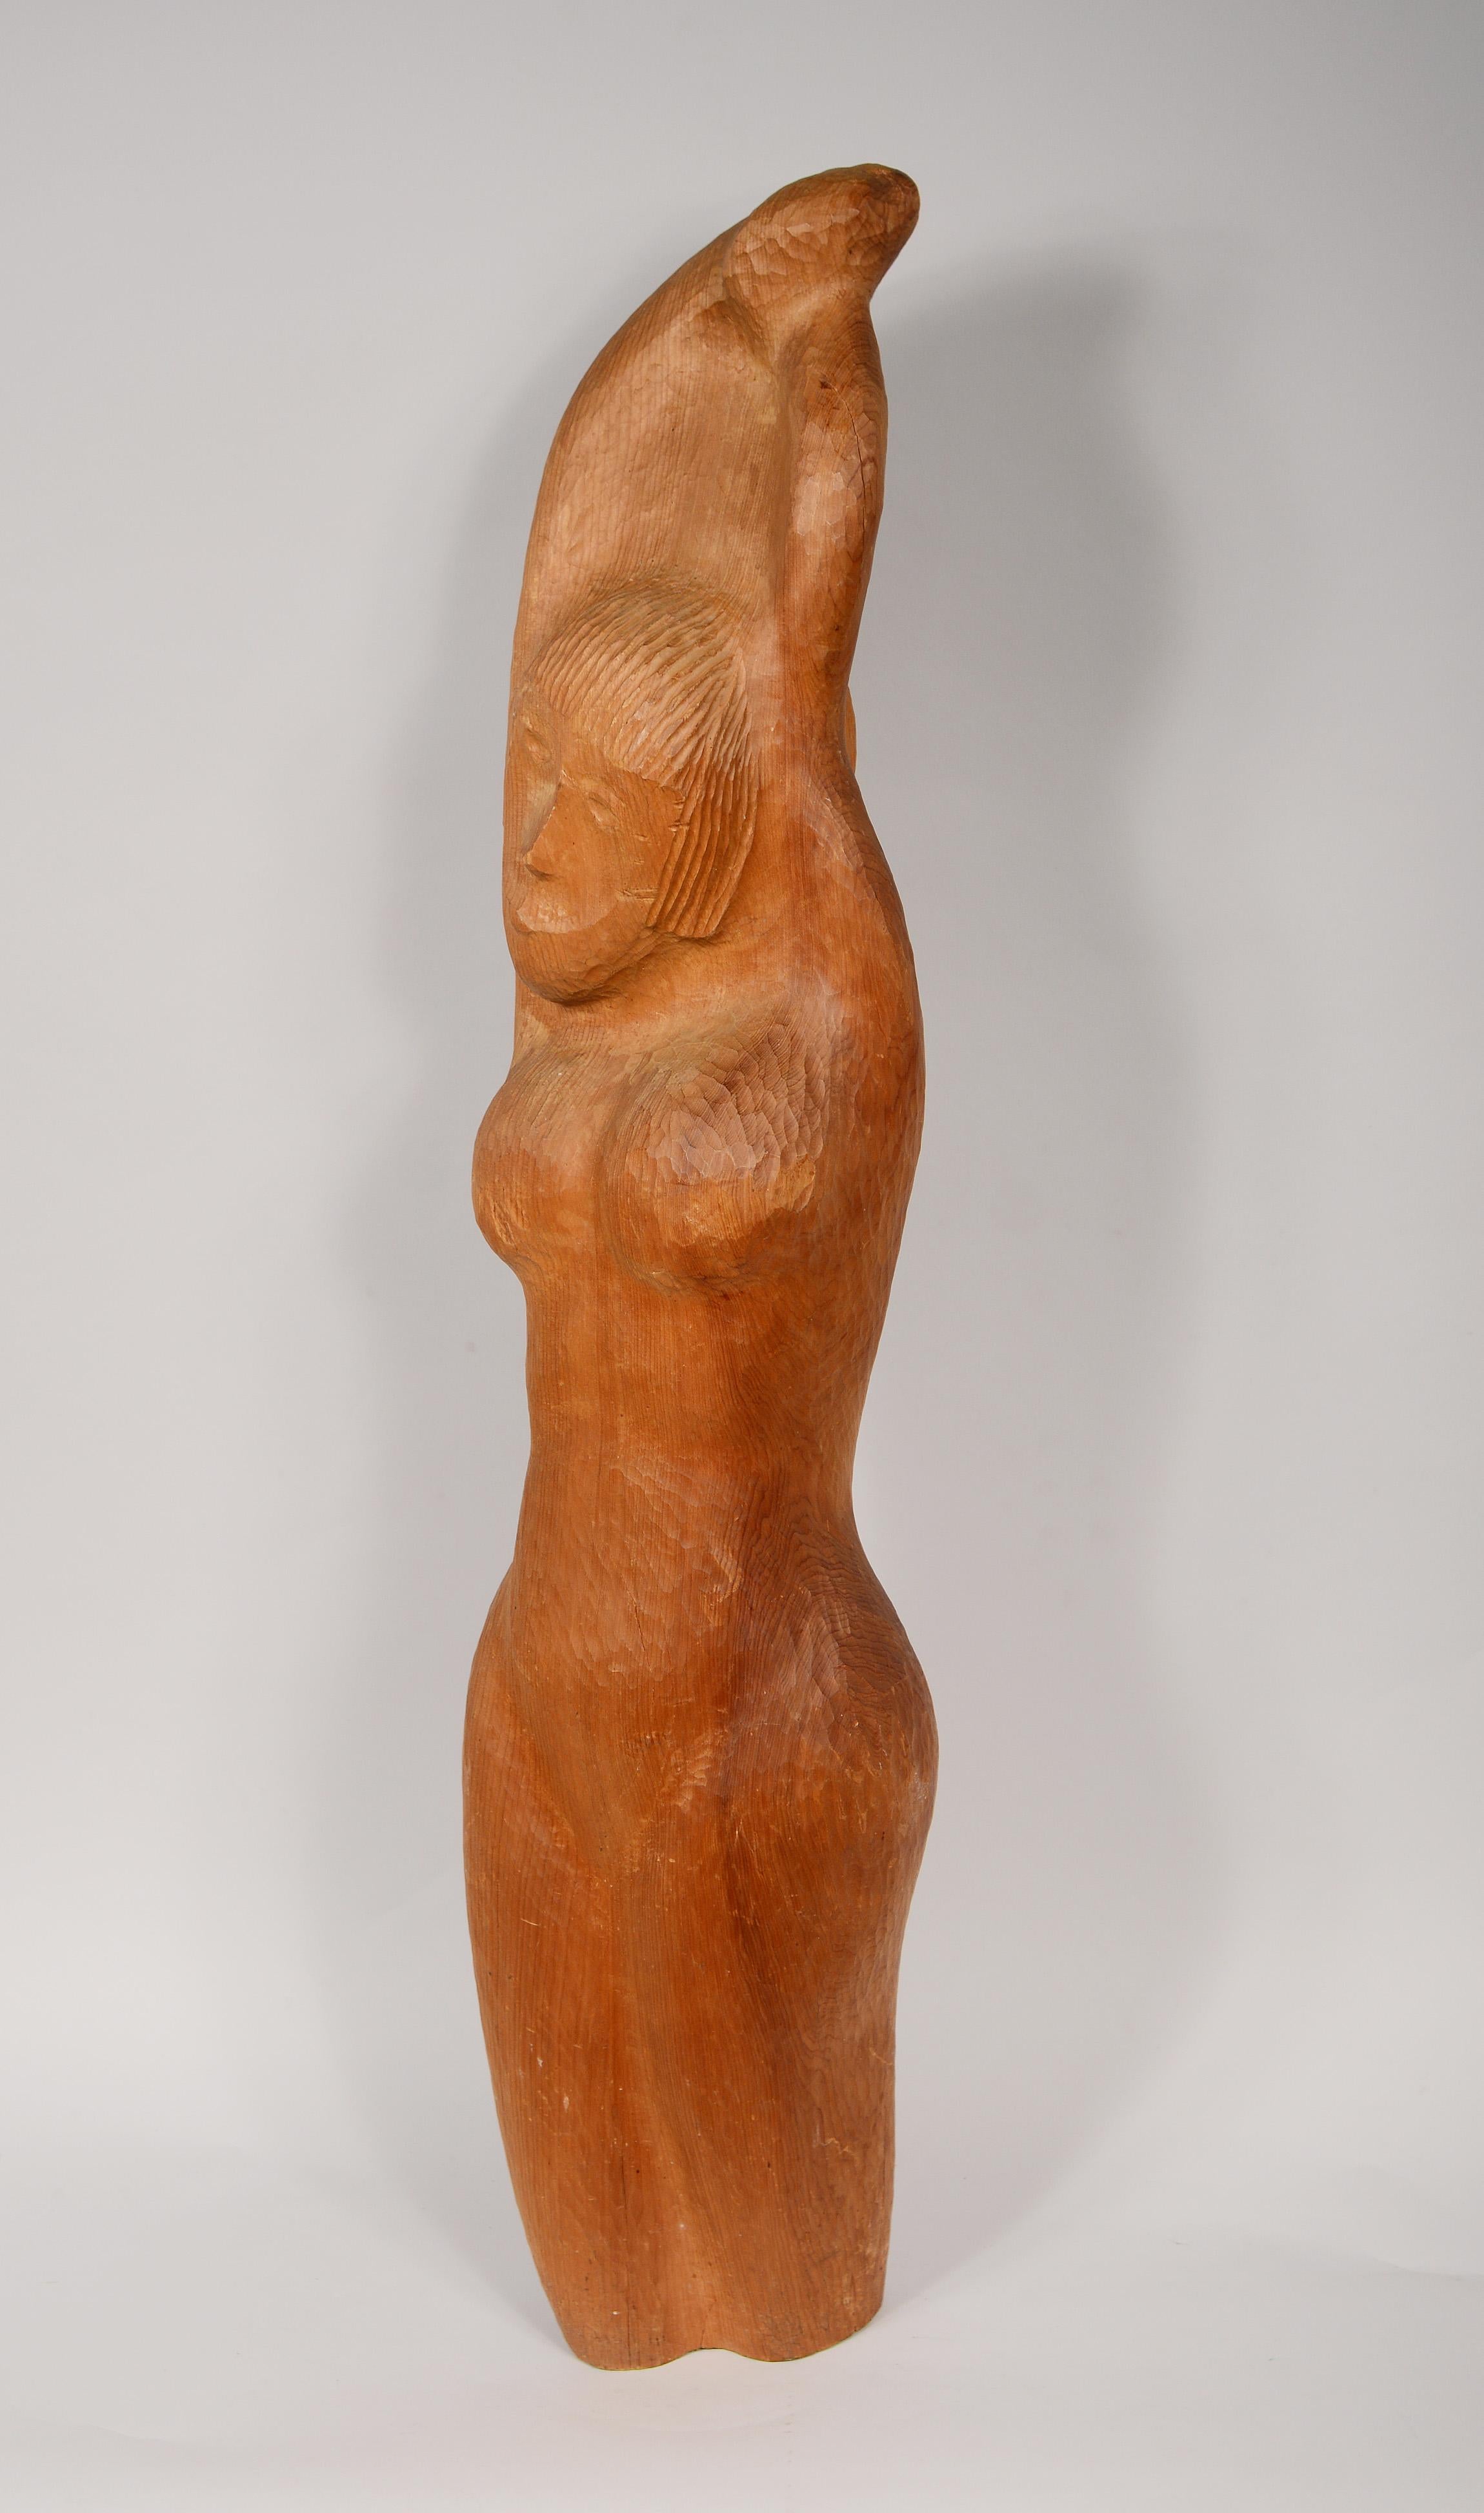 Large Folk Art caving of a nude woman. This was done by a geologist and professor as a hobby. The sculpture shows some dings, dents, scuffs and wear.